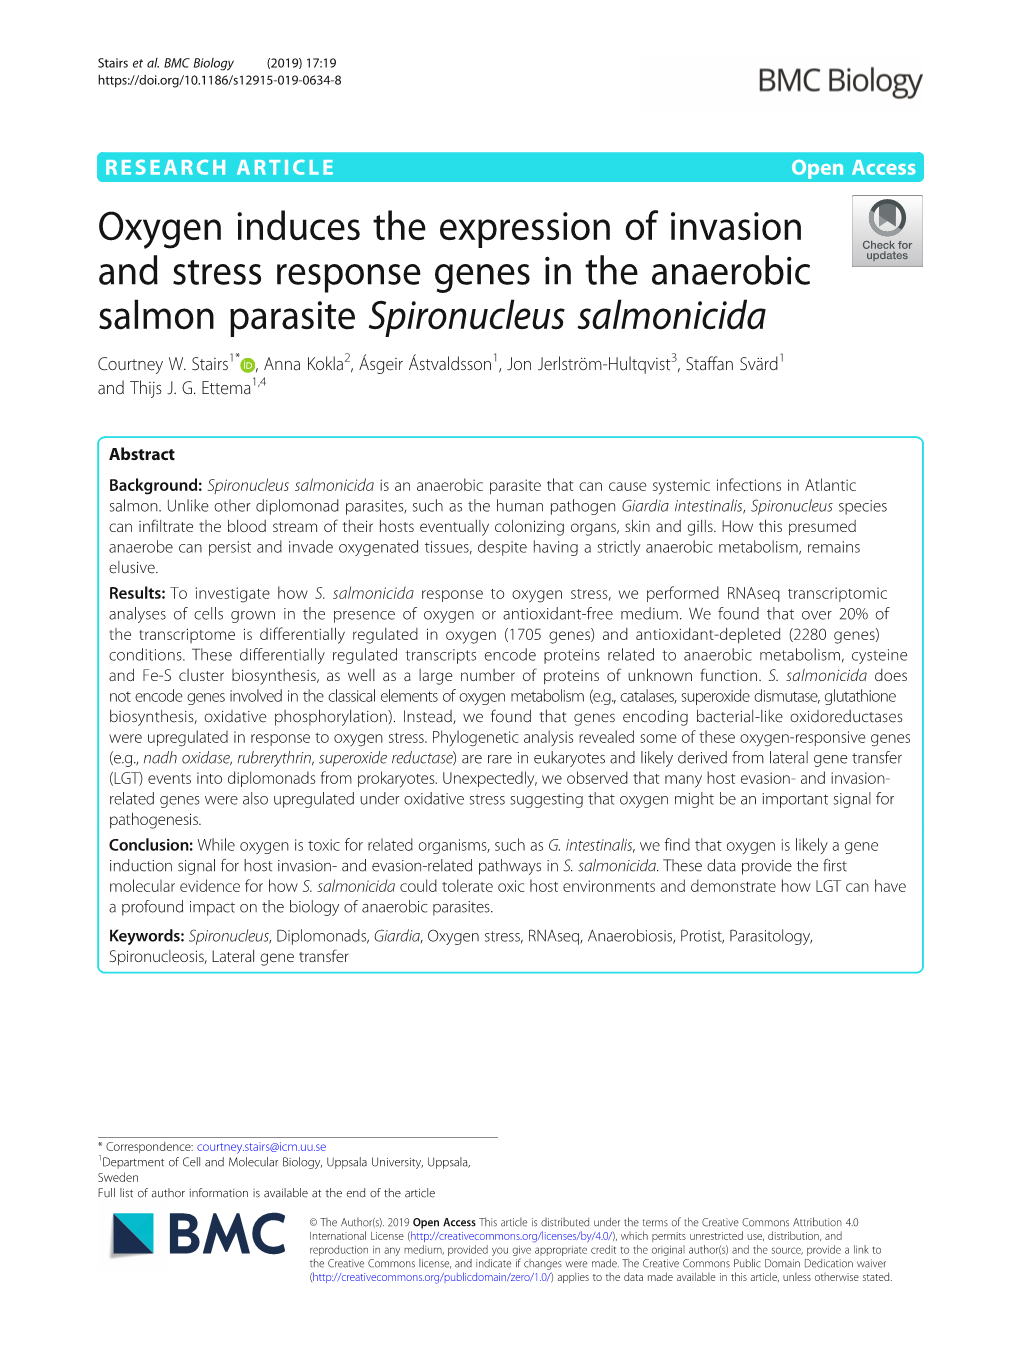 Oxygen Induces the Expression of Invasion and Stress Response Genes in the Anaerobic Salmon Parasite Spironucleus Salmonicida Courtney W